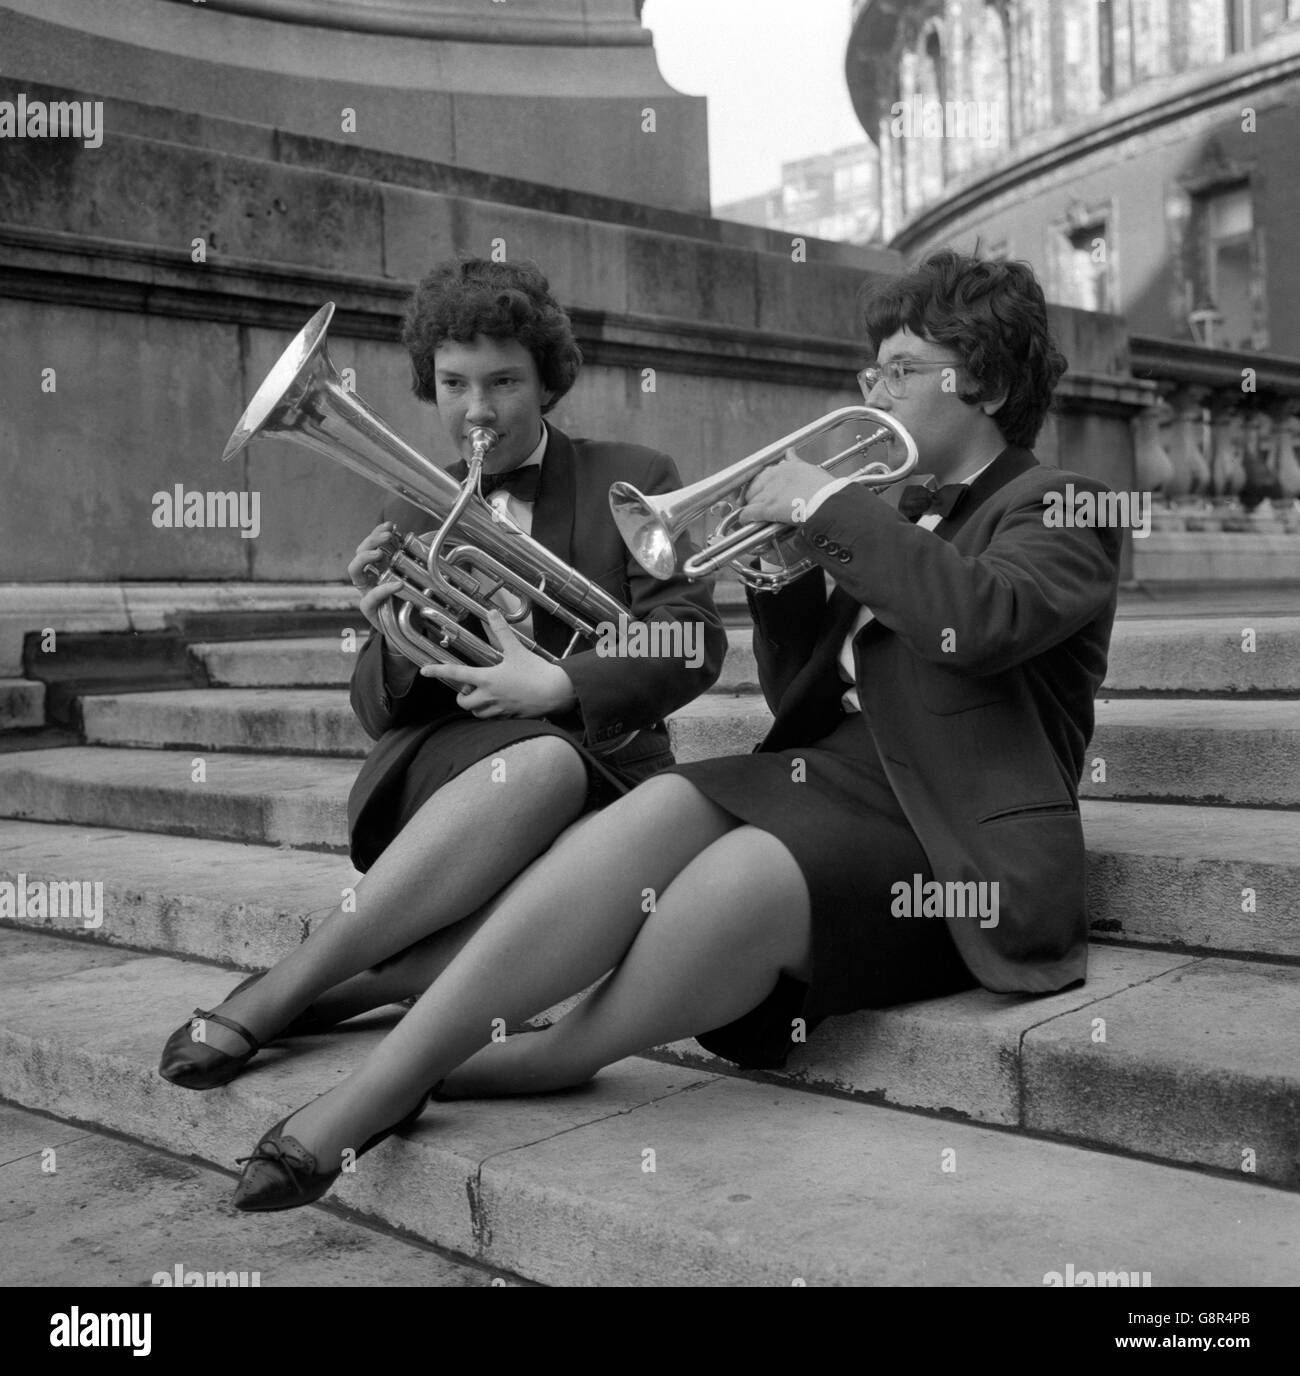 Susan Whiteman (l), 18, a baritone player, and Linda Trethewey, 16, a cornetist, of the St Dennis Silver Band, Cornwall, chose the steps for an impromptu rehearsal before competing in the National Brass Band Championships at the Royal Albert Hall, London. Stock Photo